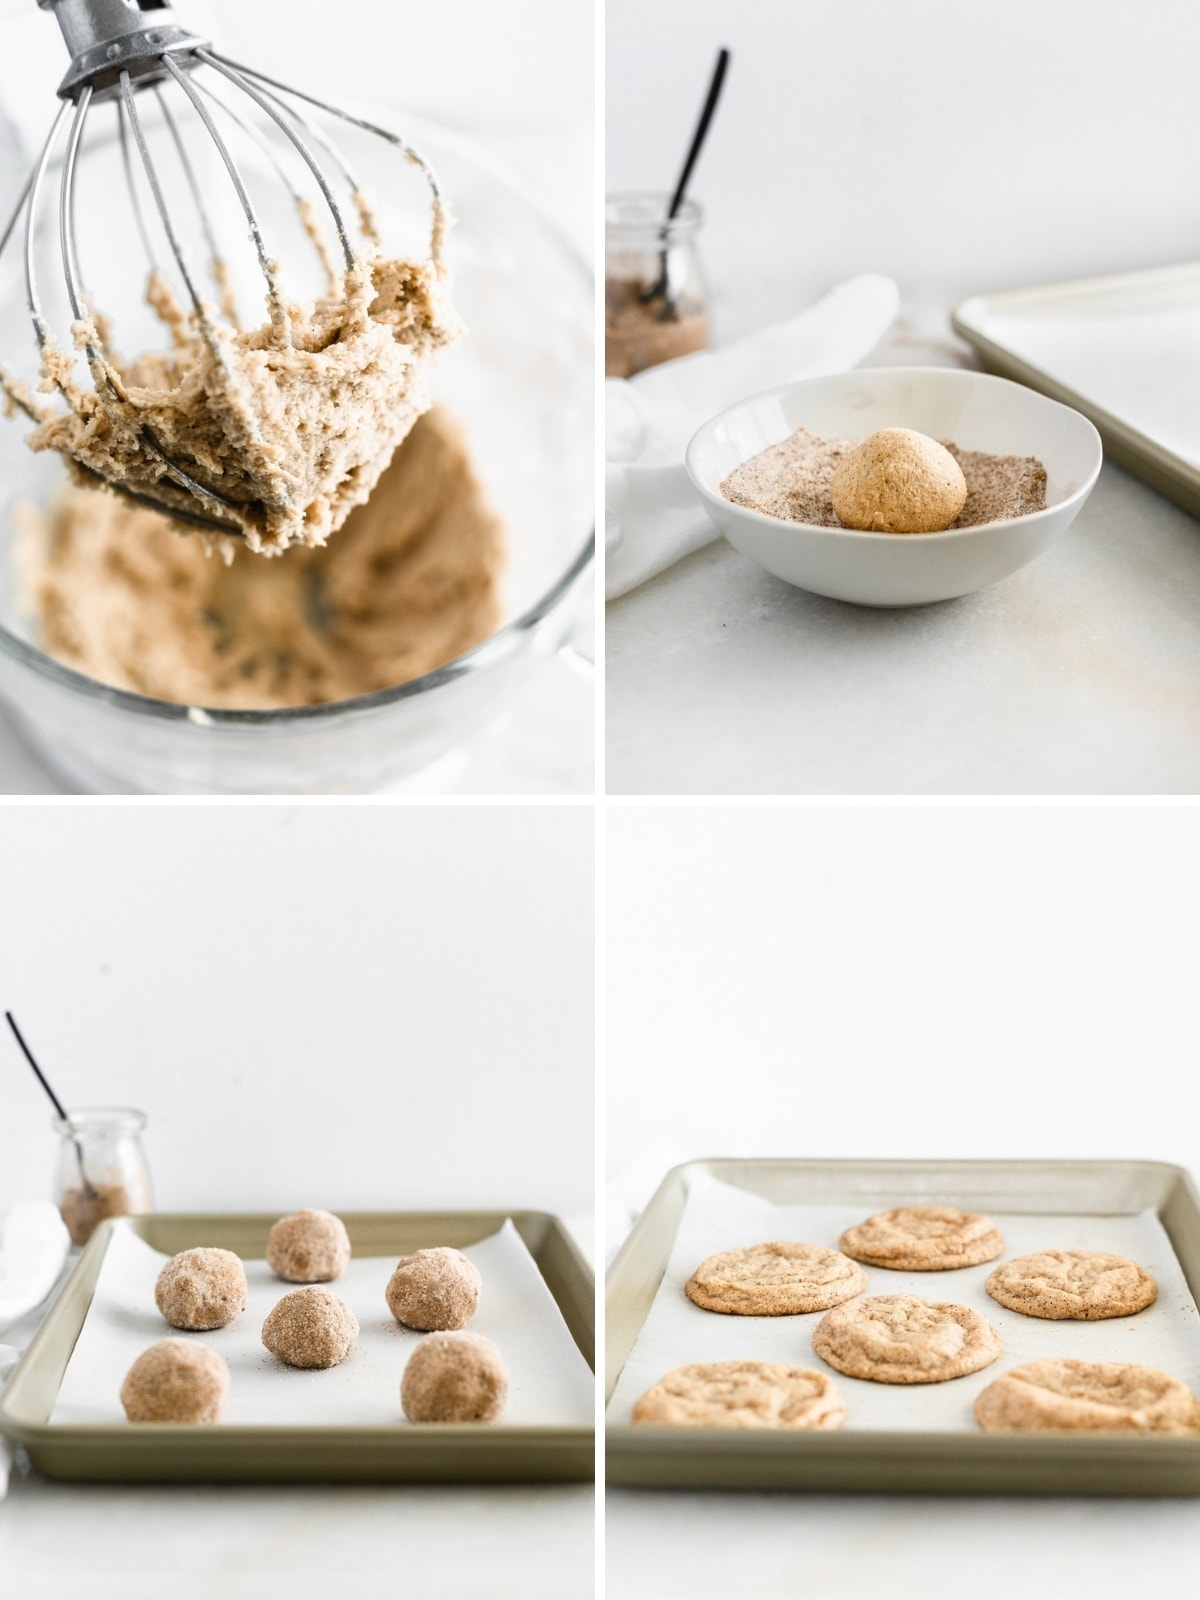 How to make chai spiced snickerdoodles.